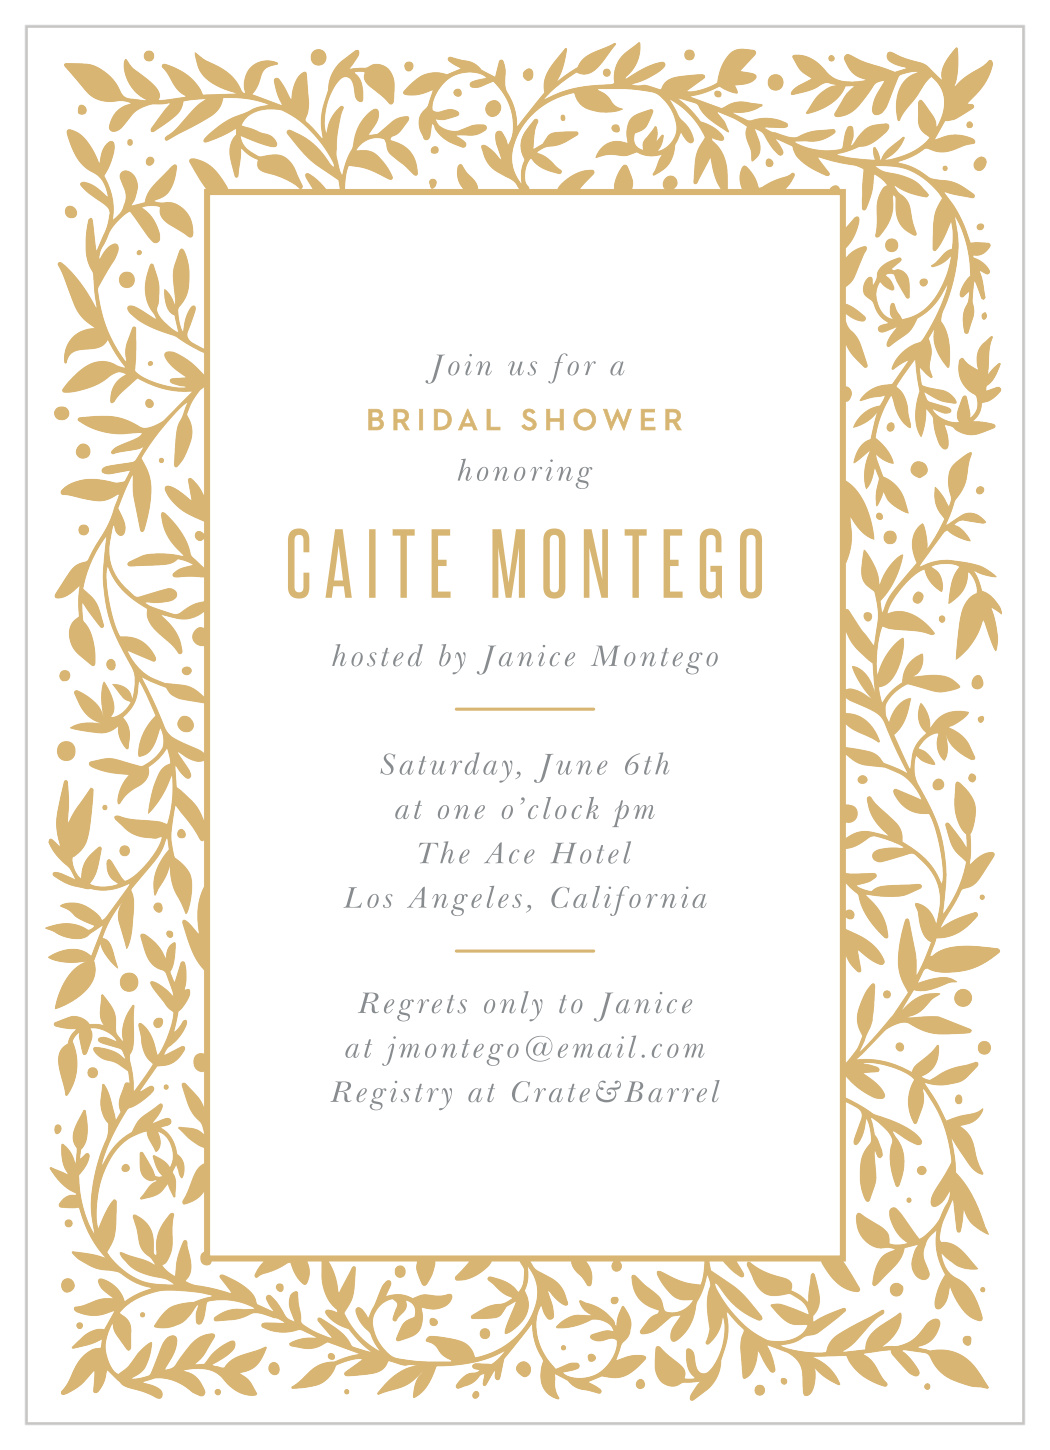 Classical Library Bridal Shower Invitations